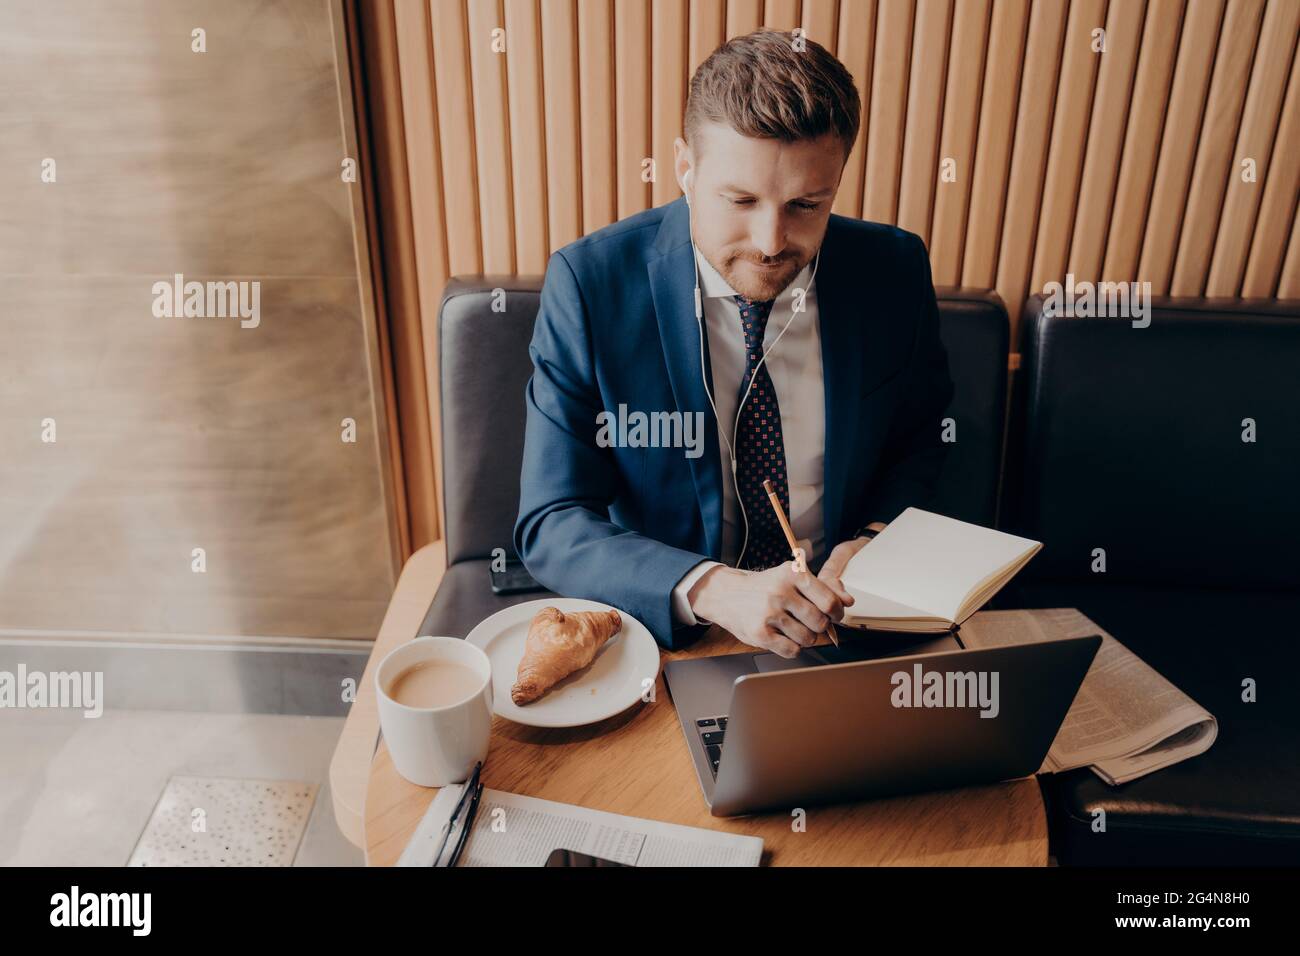 Male business executive watching webinar on laptop in restaurant Stock Photo